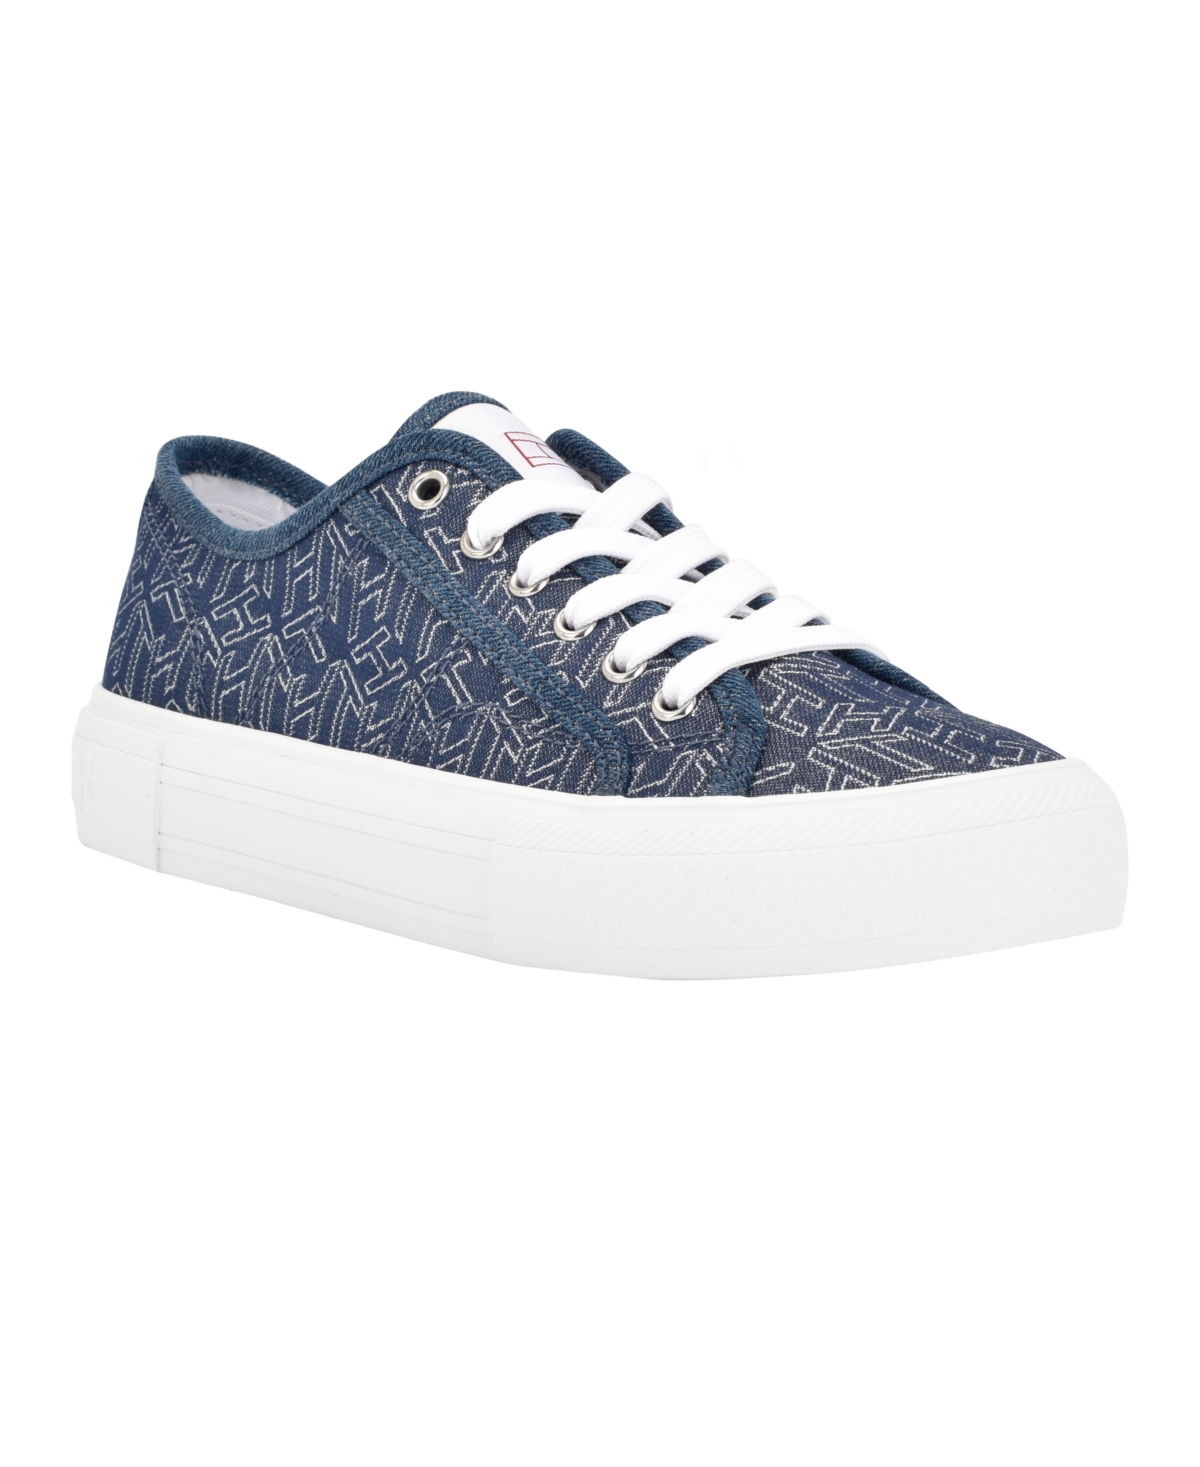 UPC 197016282909 product image for Tommy Hilfiger Women's Alessy Casual Lace Up Sneakers Women's Shoes | upcitemdb.com